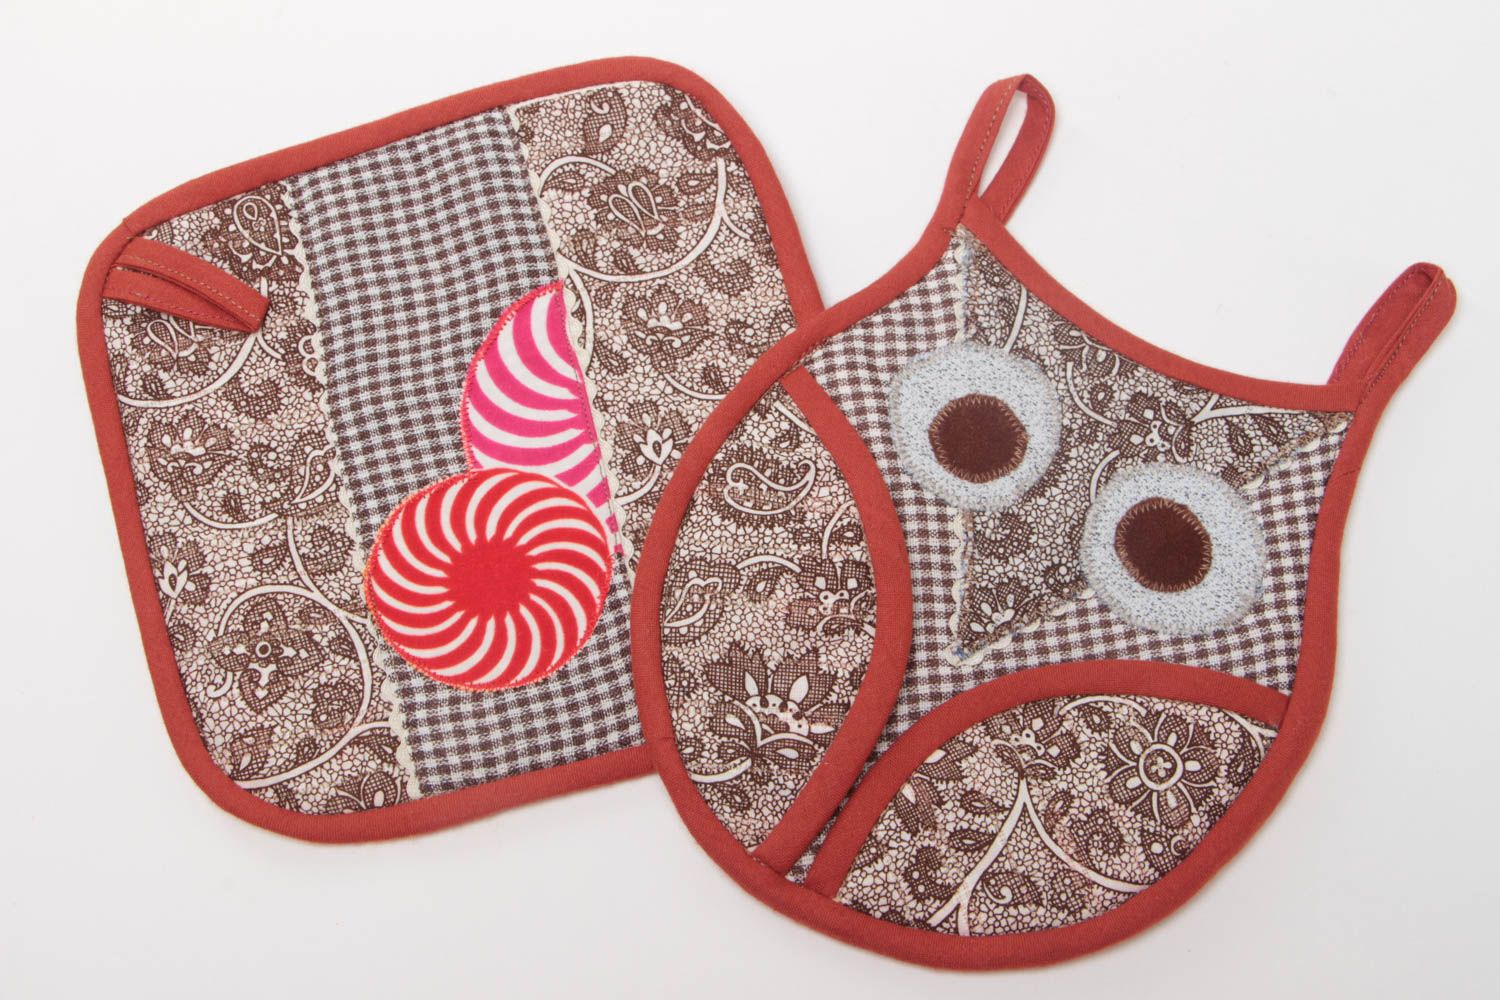 Hot pot holders made of cotton set of handmade kitchen textiles 2 pieces photo 2